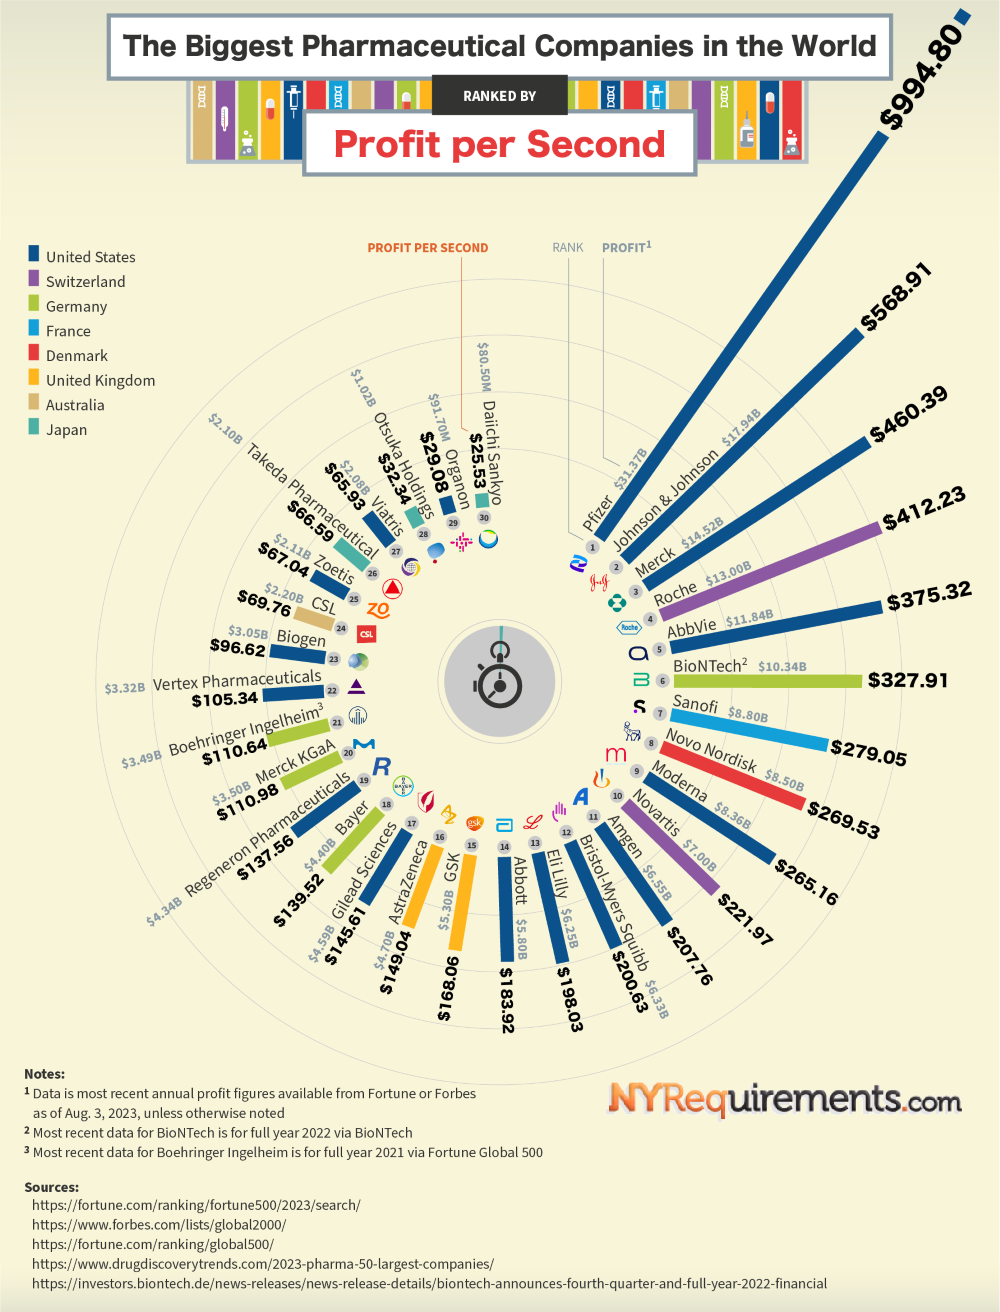 The Drug Companies That Make the Most Profit #Infographic